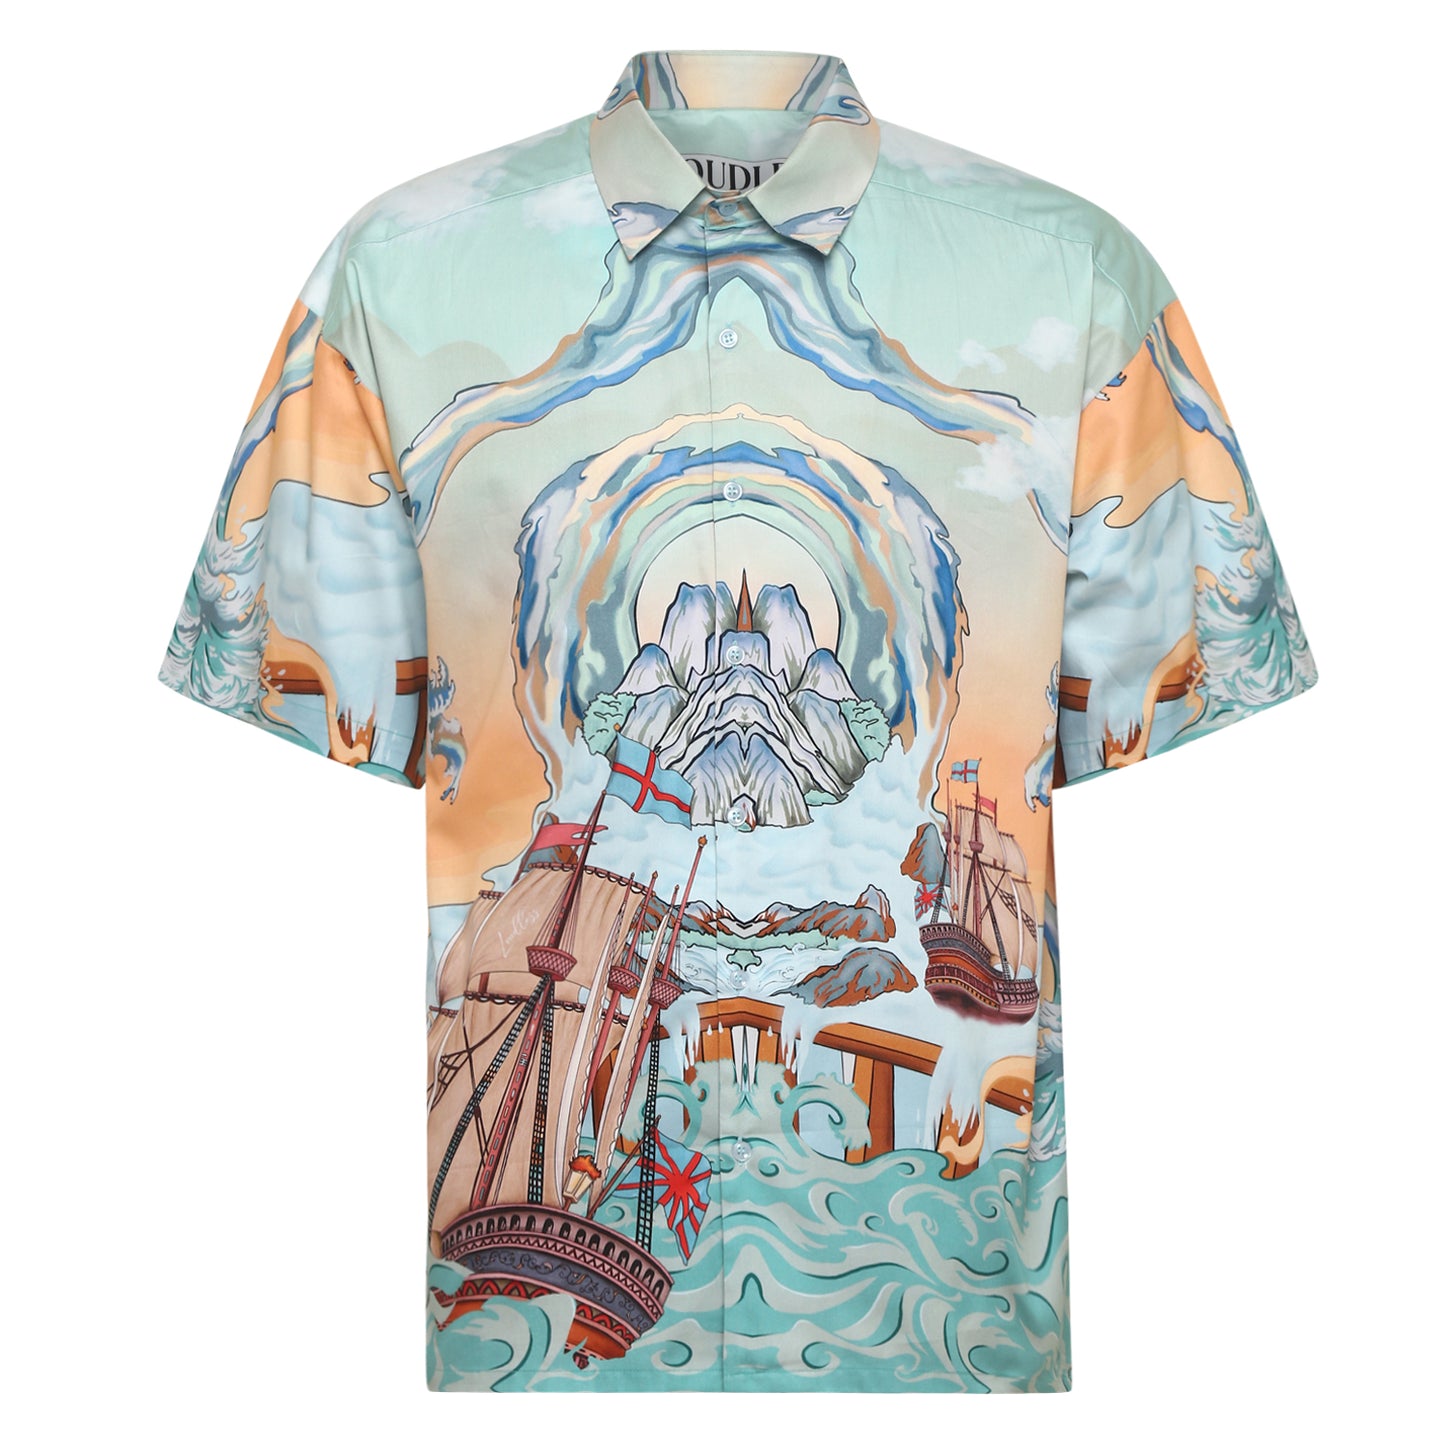 Elevate your streetwear wardrobe with this luxurious pastel-colored cotton shirt